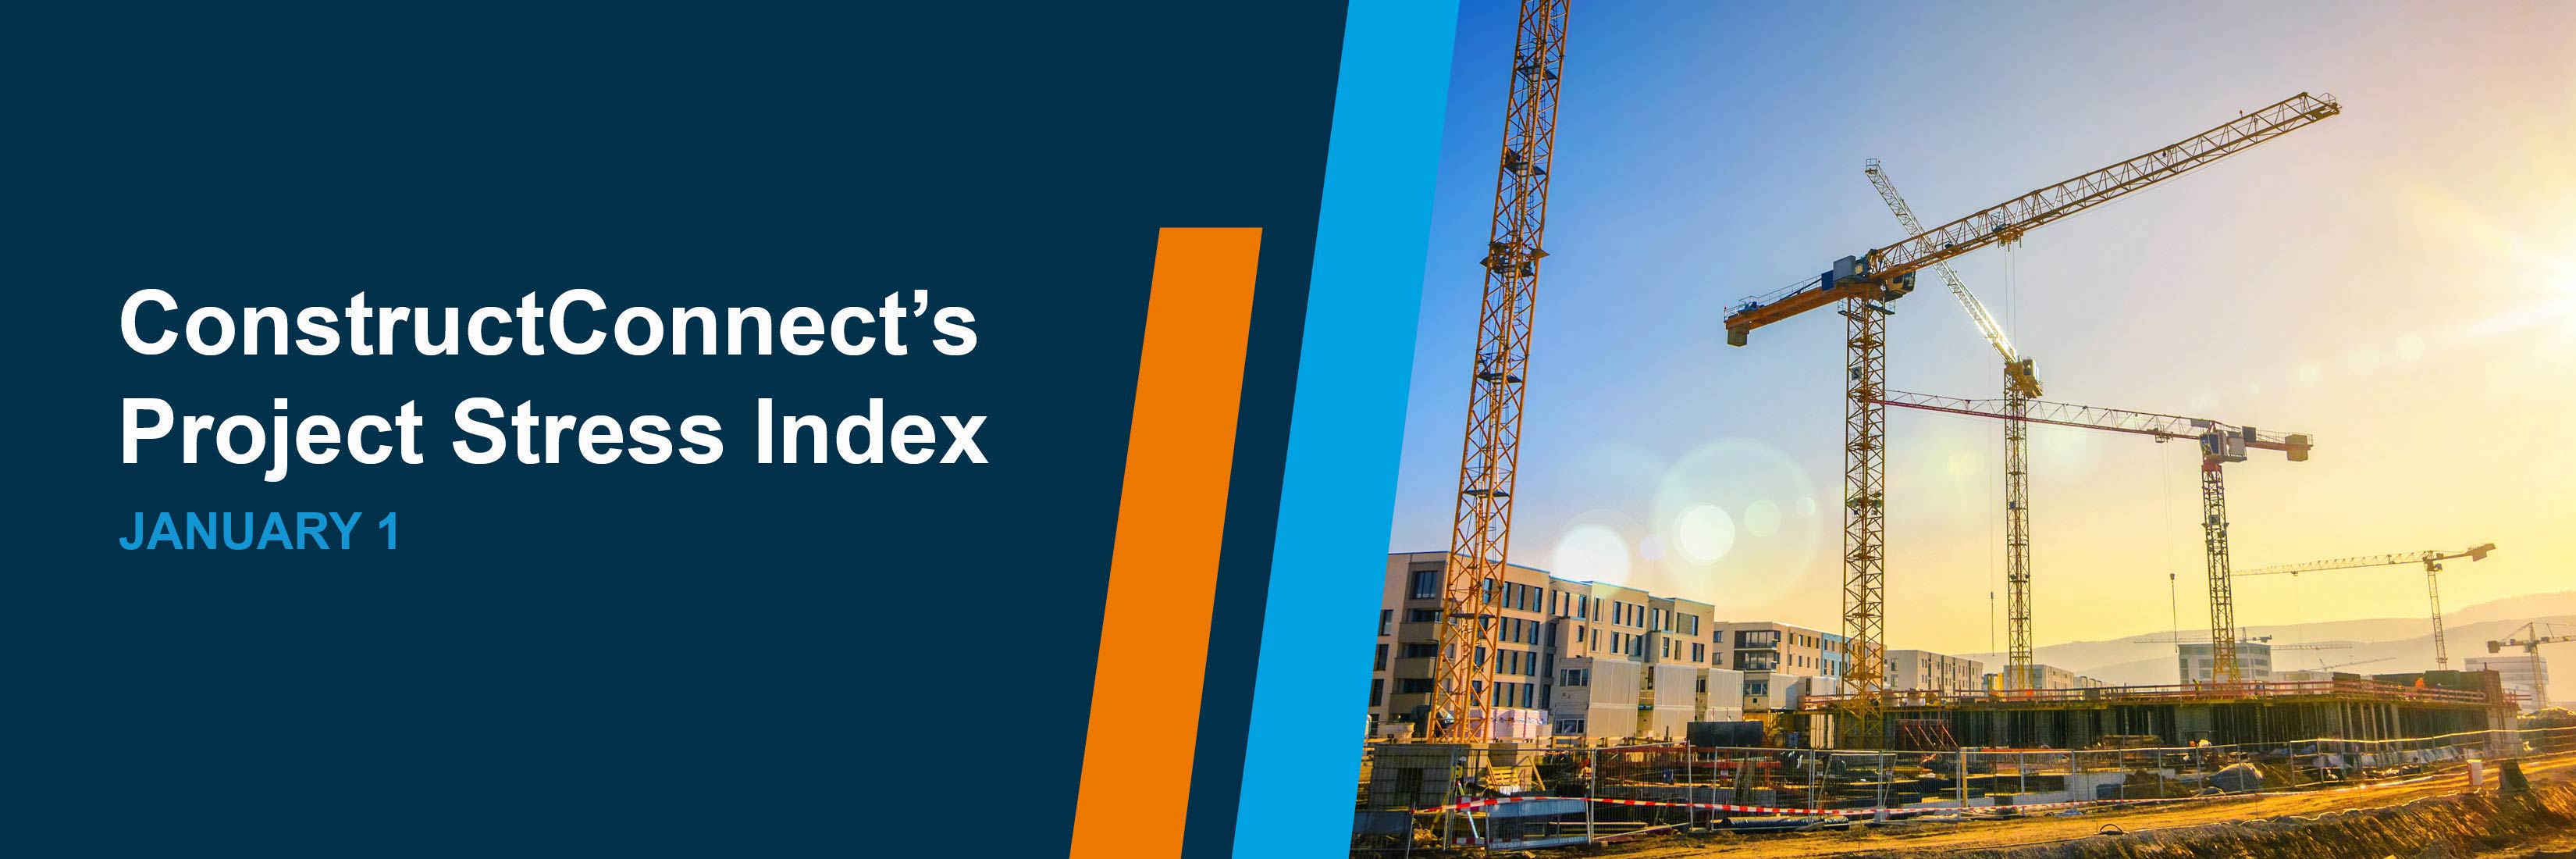 ConstructConnect's Project Stress Index - January 1